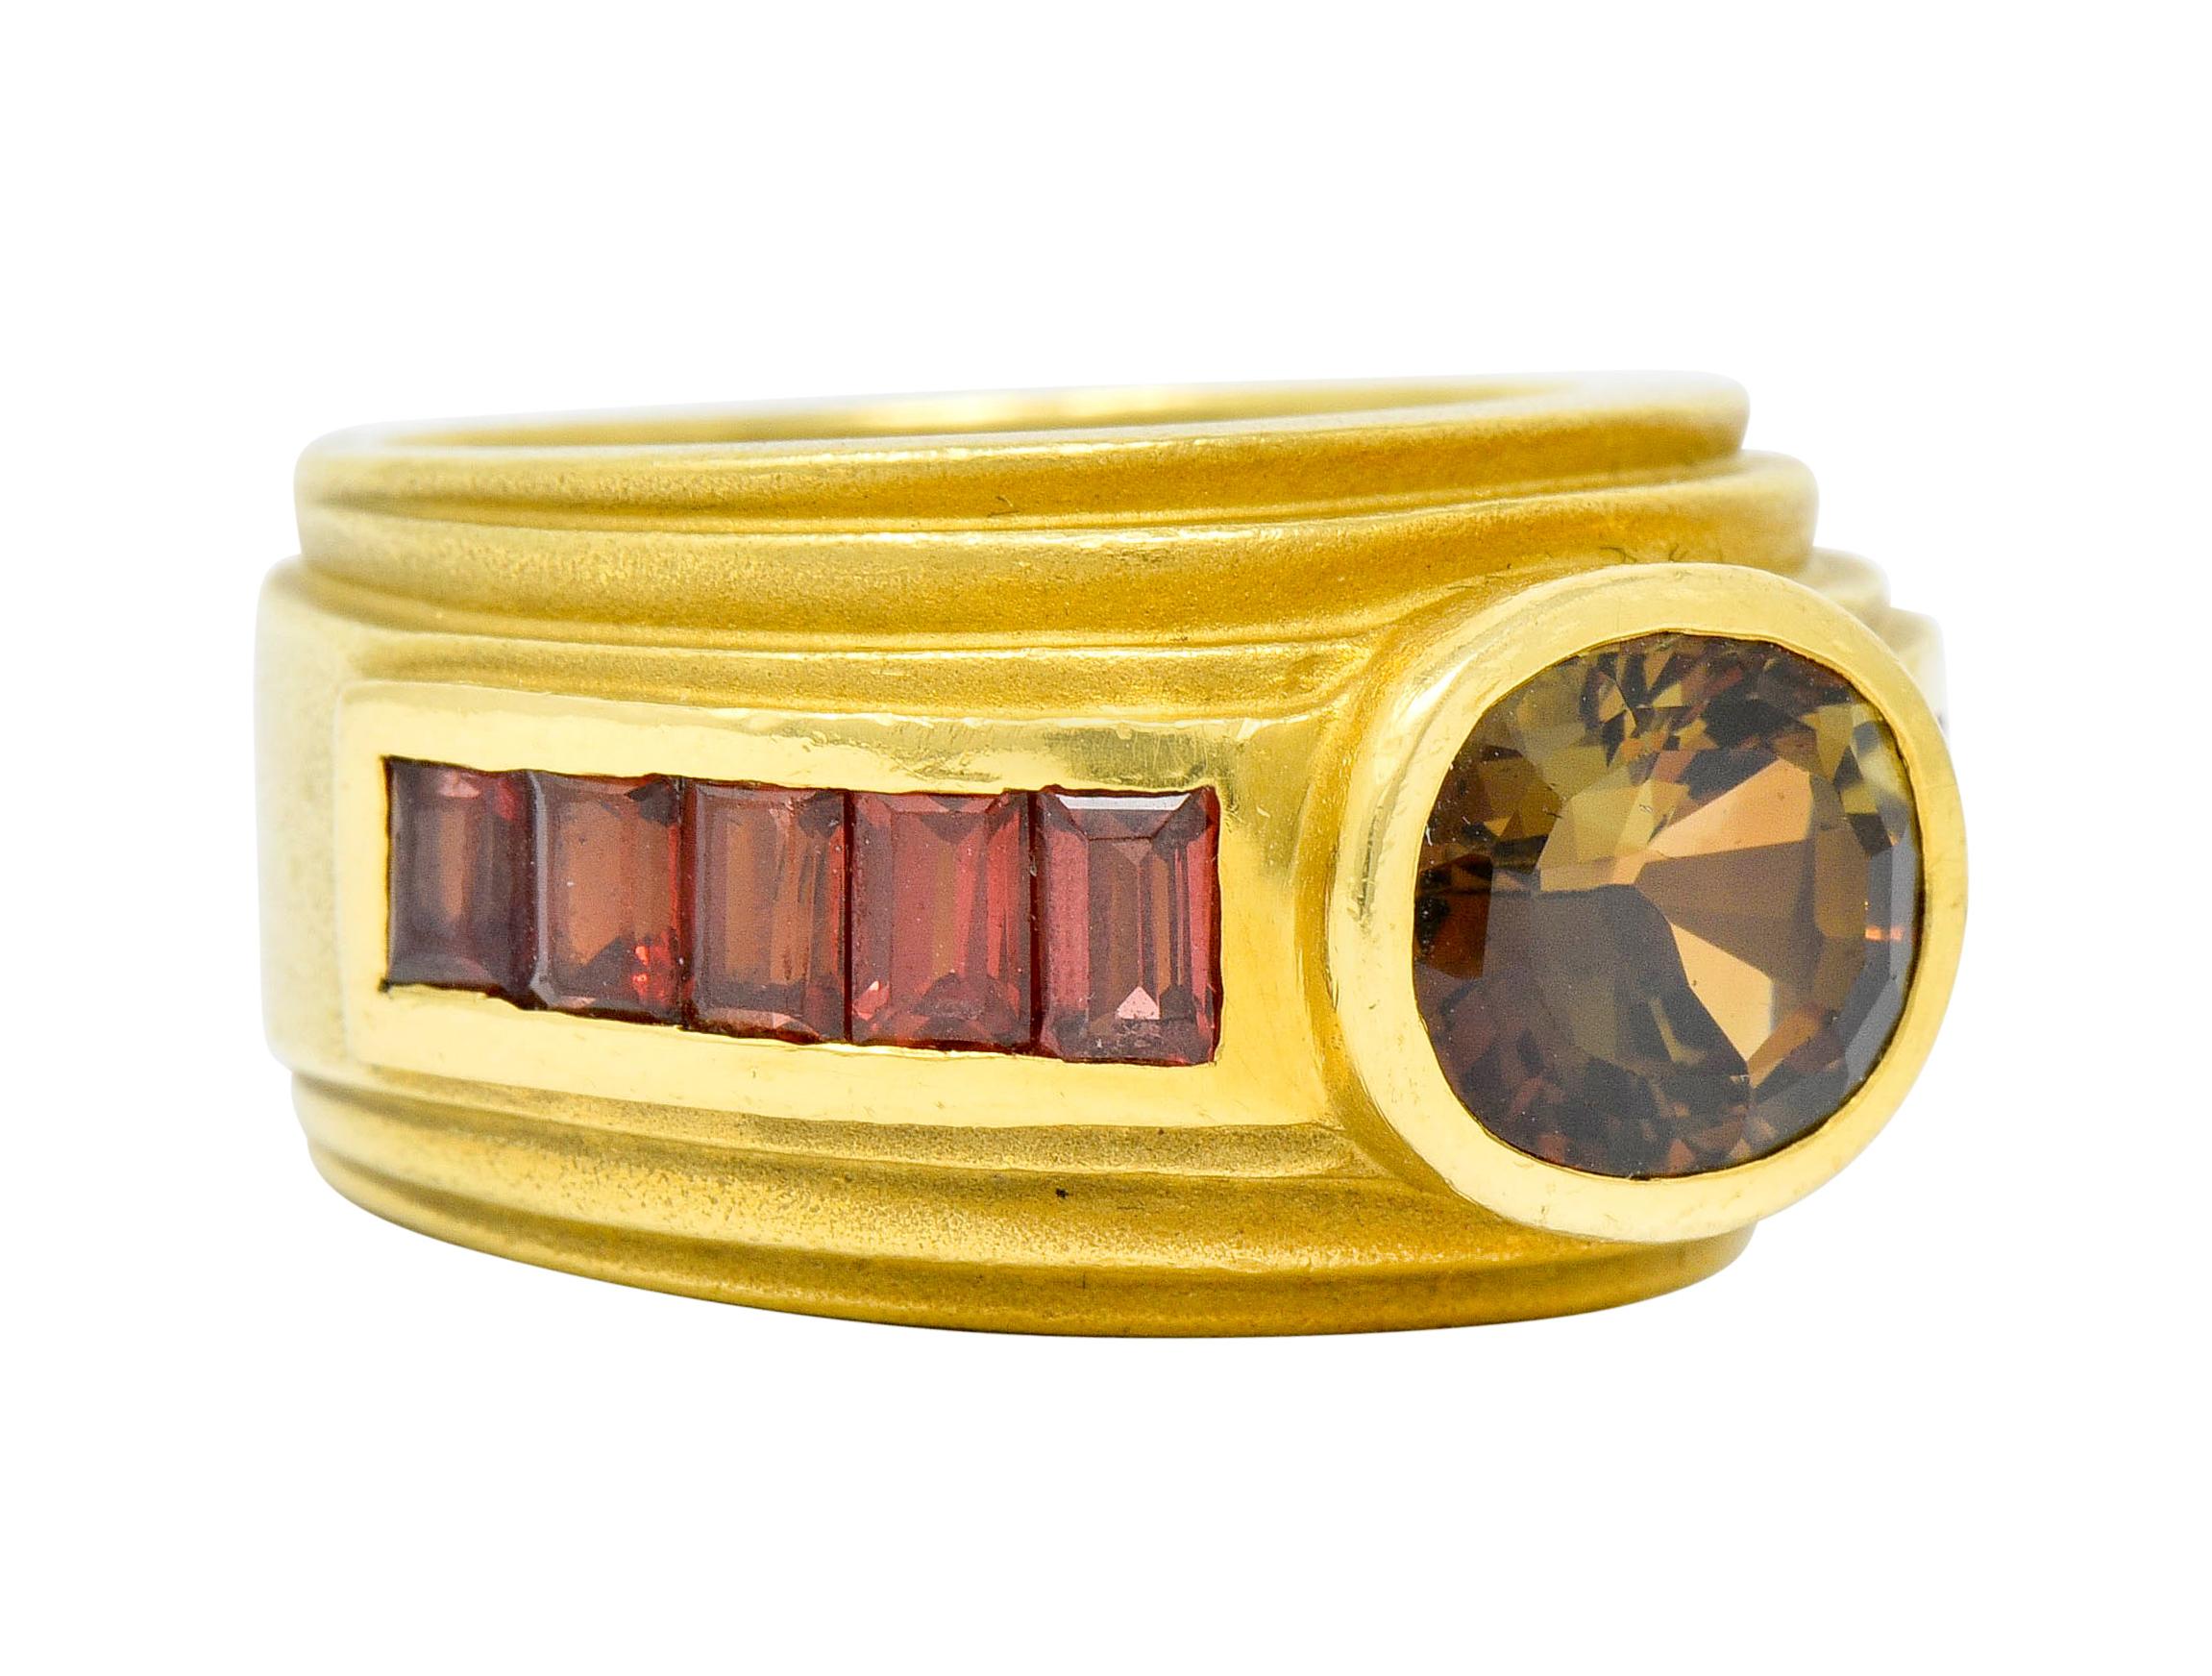 Designed as a wide band ring with deeply ridged edges and matte gold finish

Centering a bezel set oval mixed cut andalusite weighing approximately 2.55 carats

Andalusite displays intriguing color of predominantly green body color with flashes of